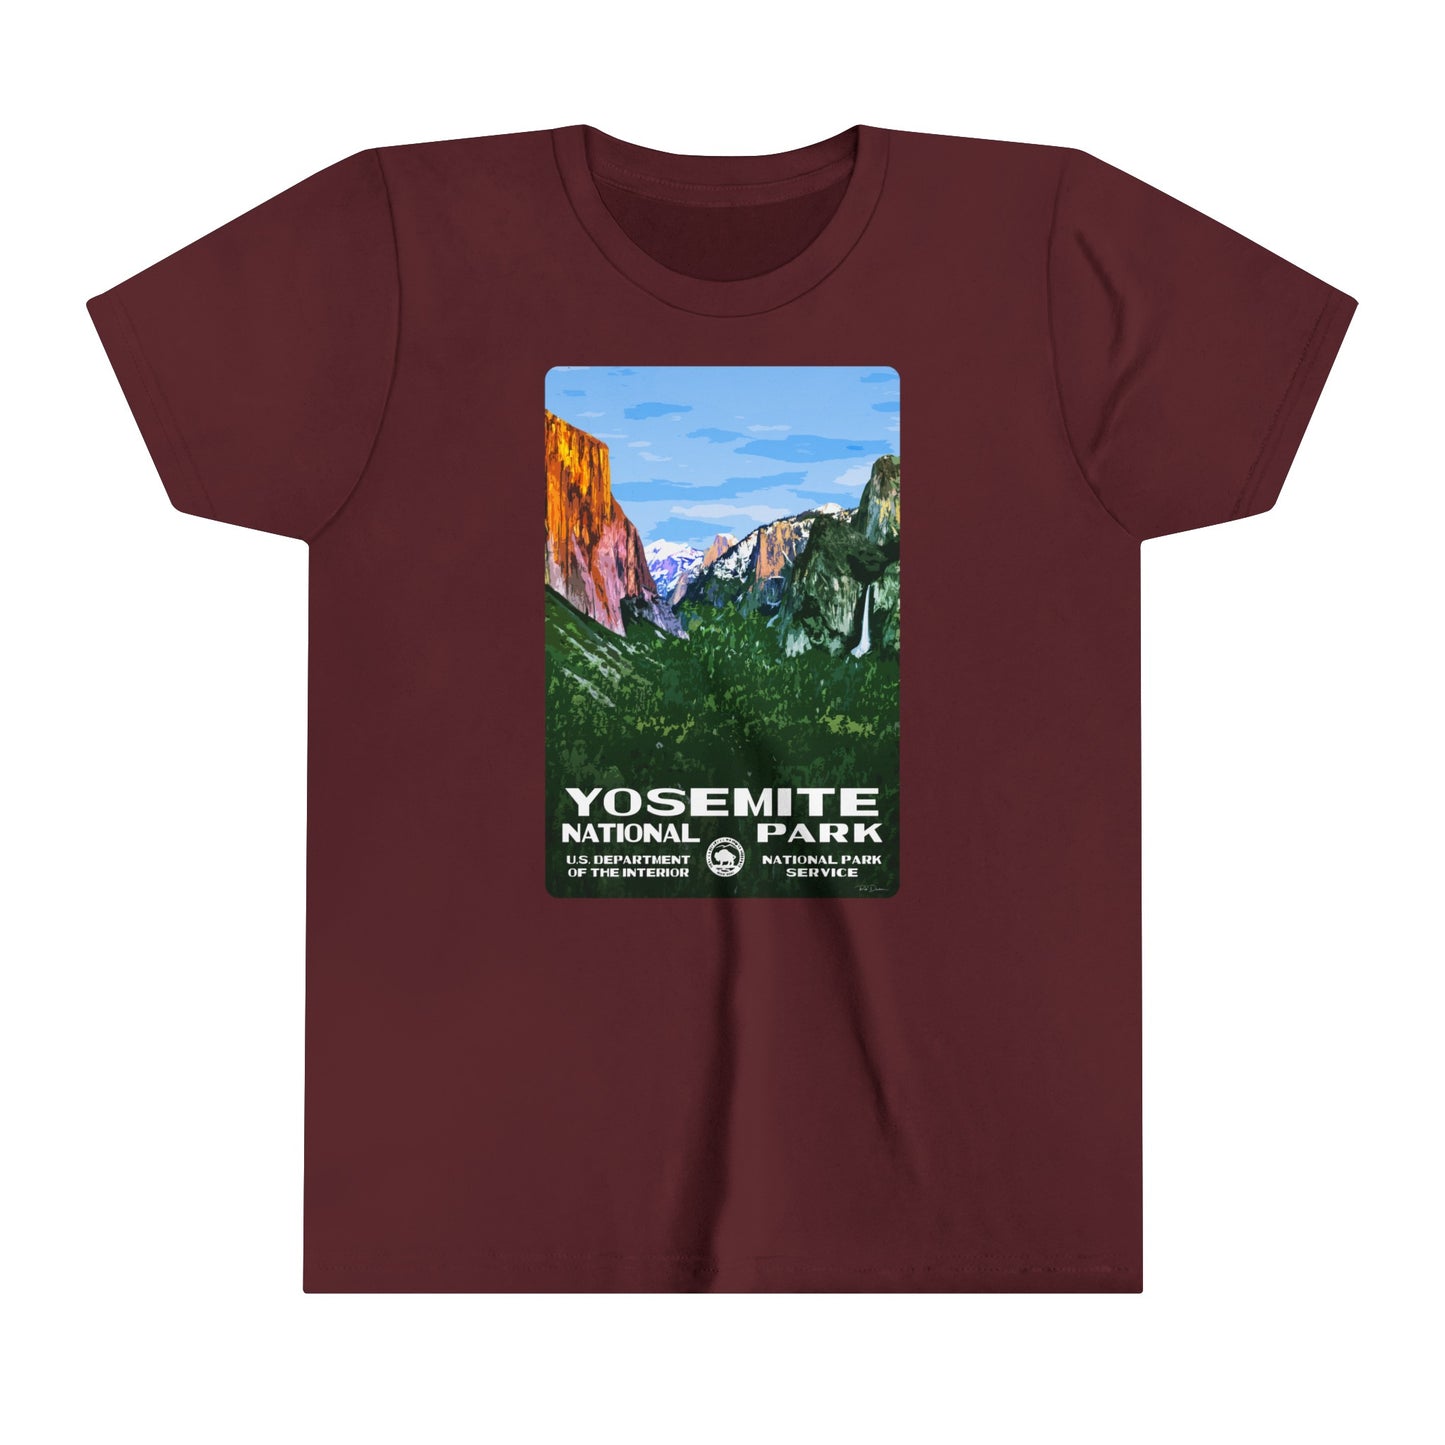 Copy of Yosemite National Park (Tunnel View) Kids' T-Shirt